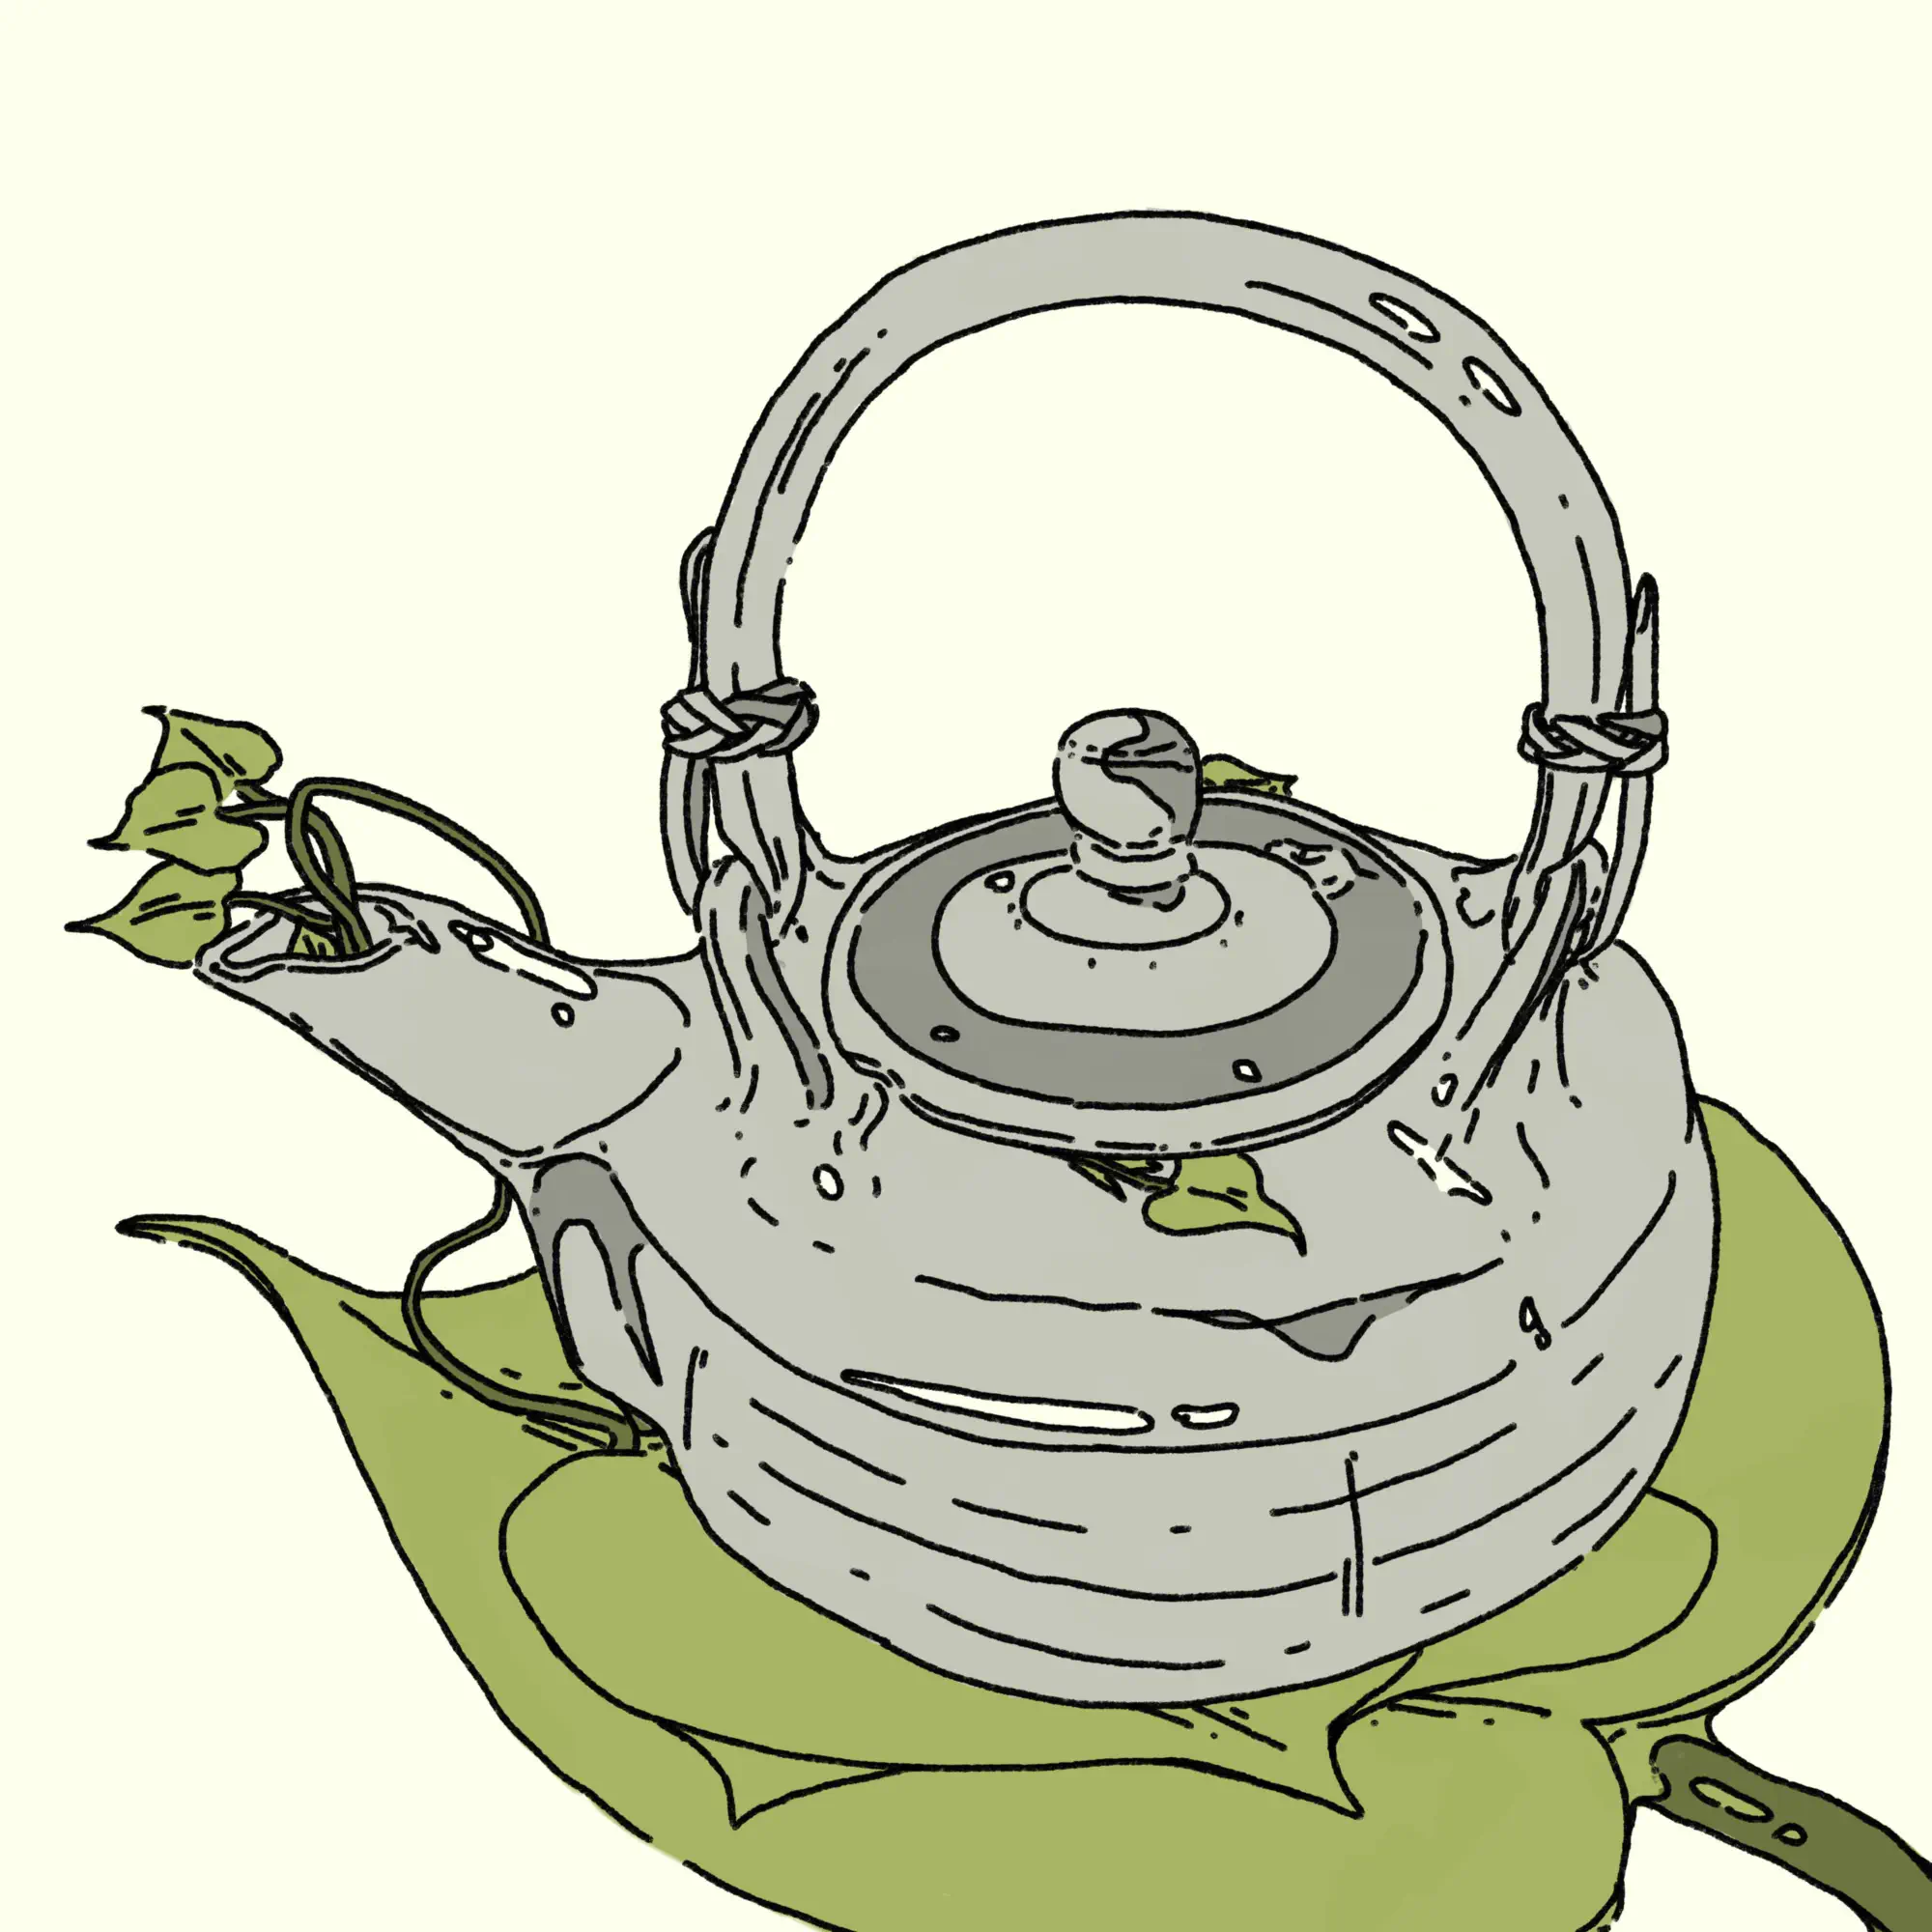 A frog and toad inspired garden tea pot.